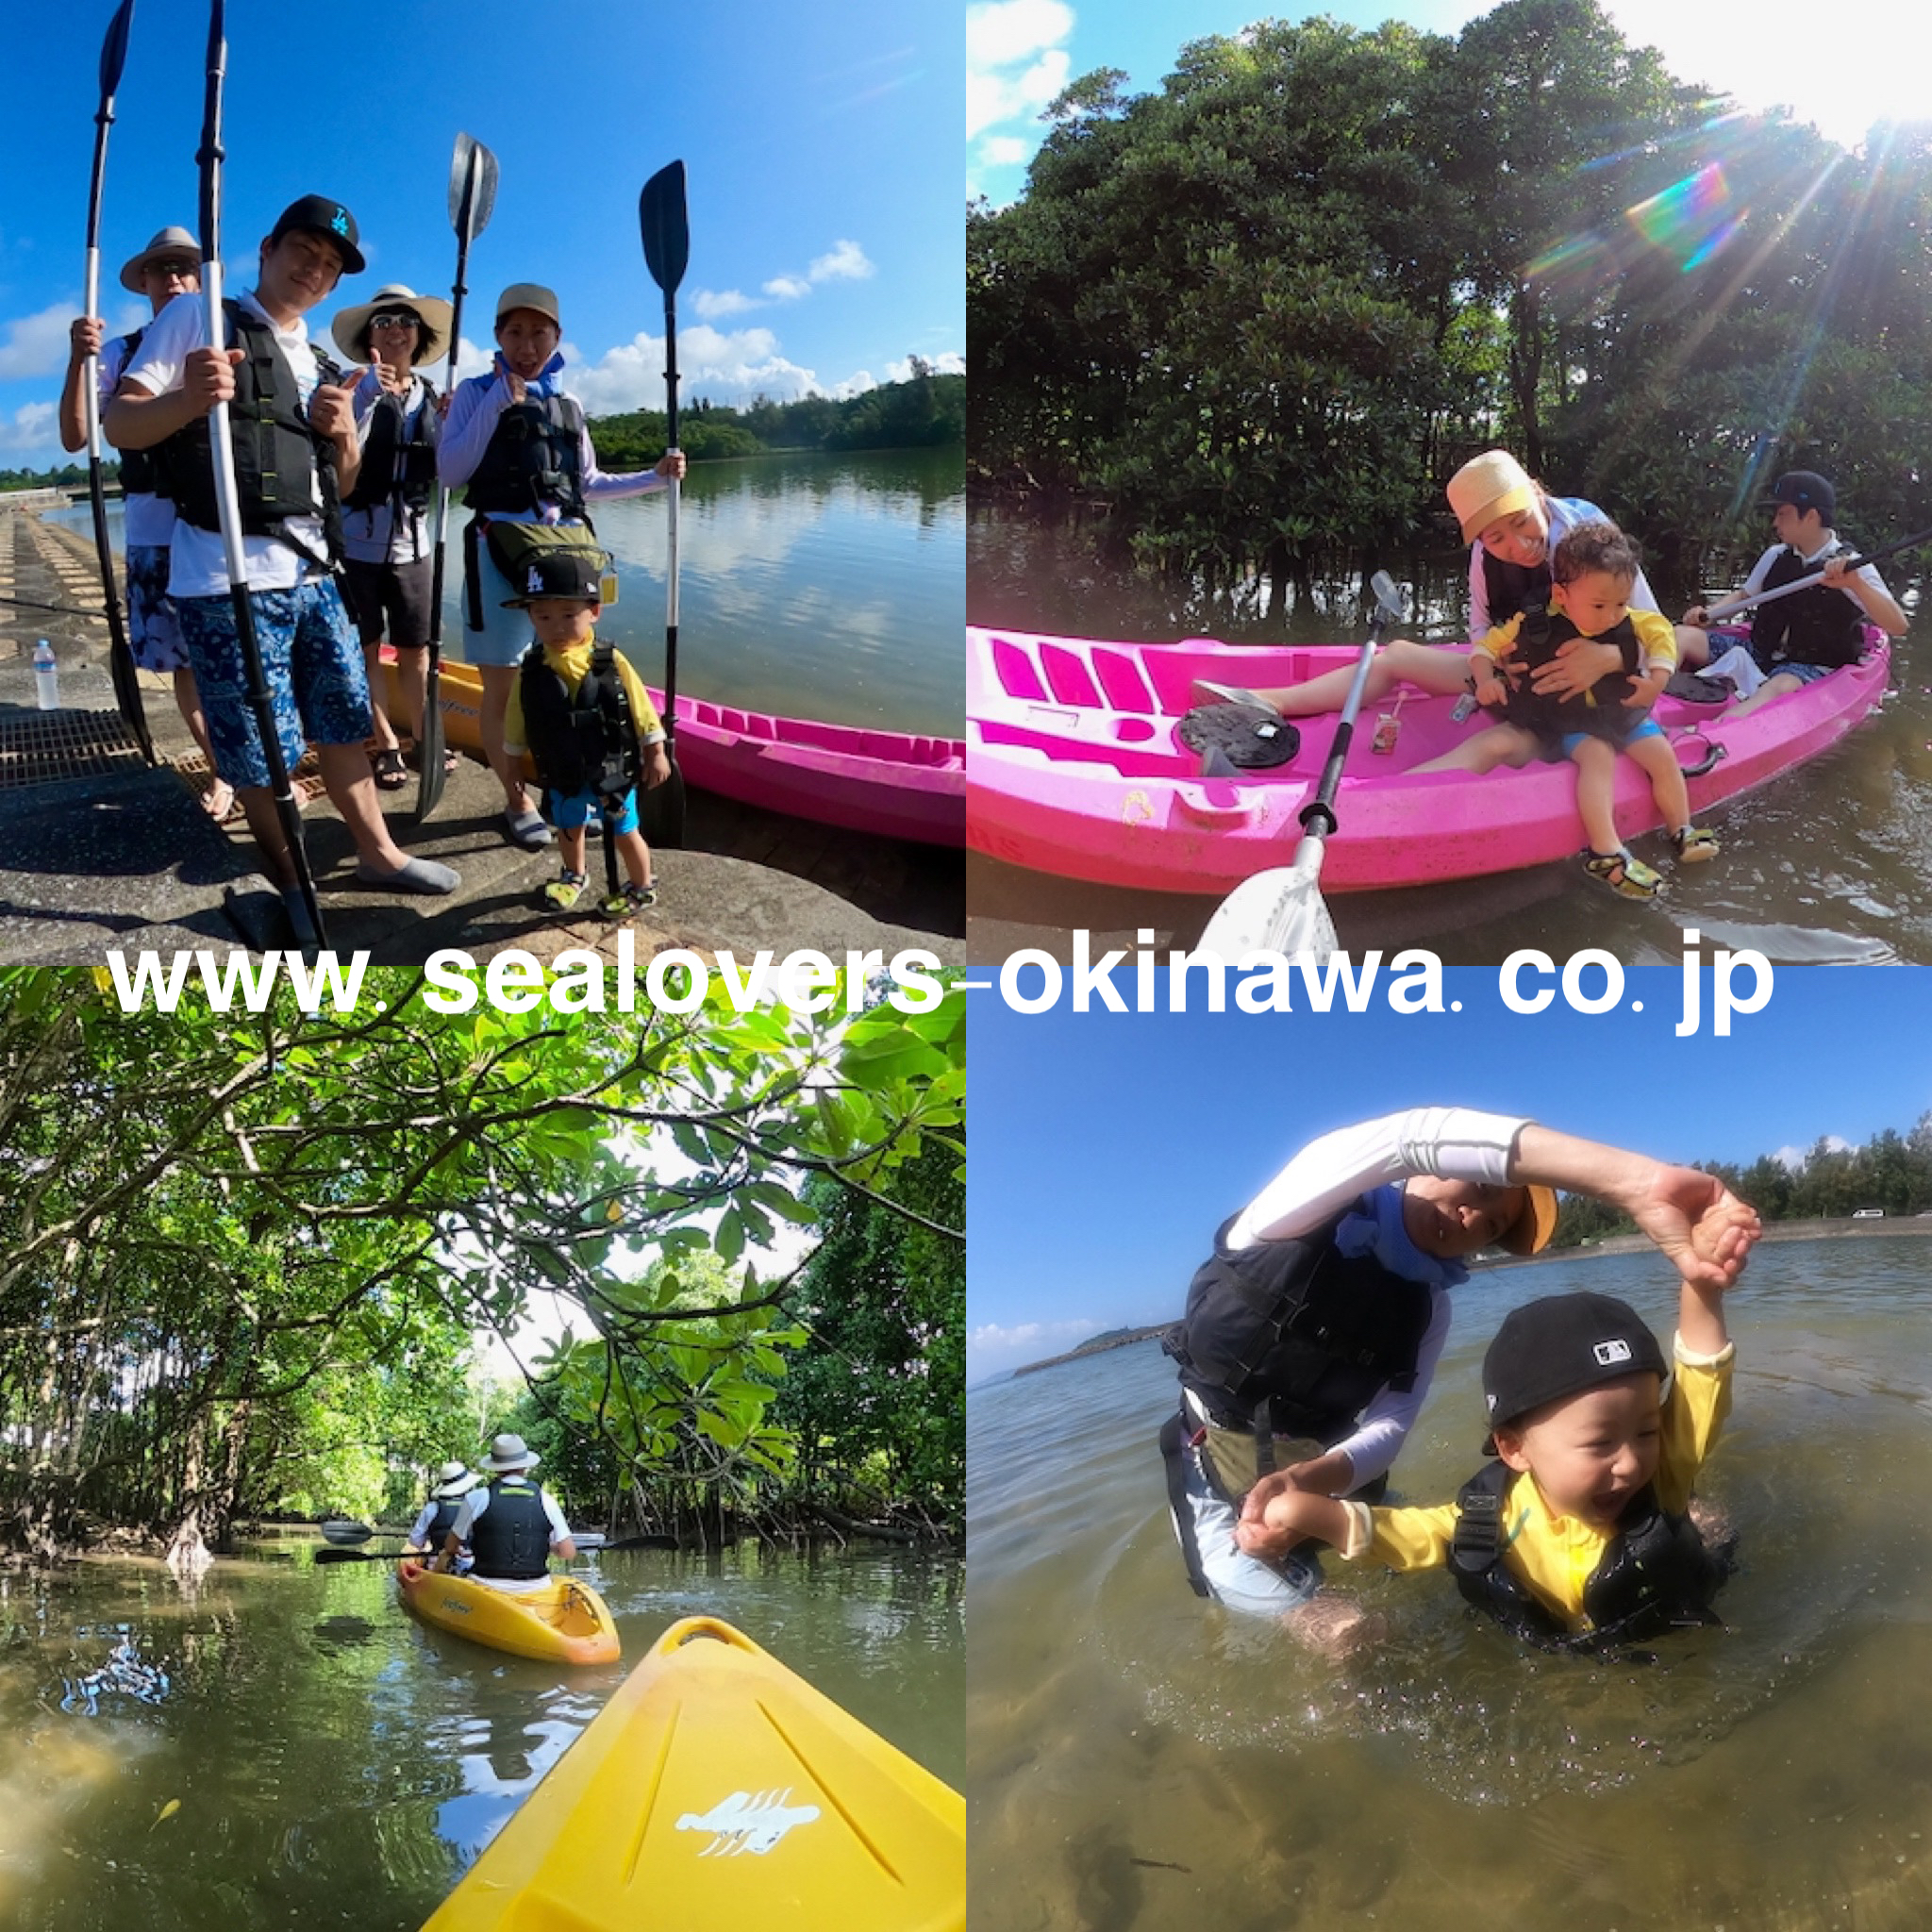 With measures taken against cold it is possible to enjoy the activity even in winter!! Mangrove and sea kayaking!!